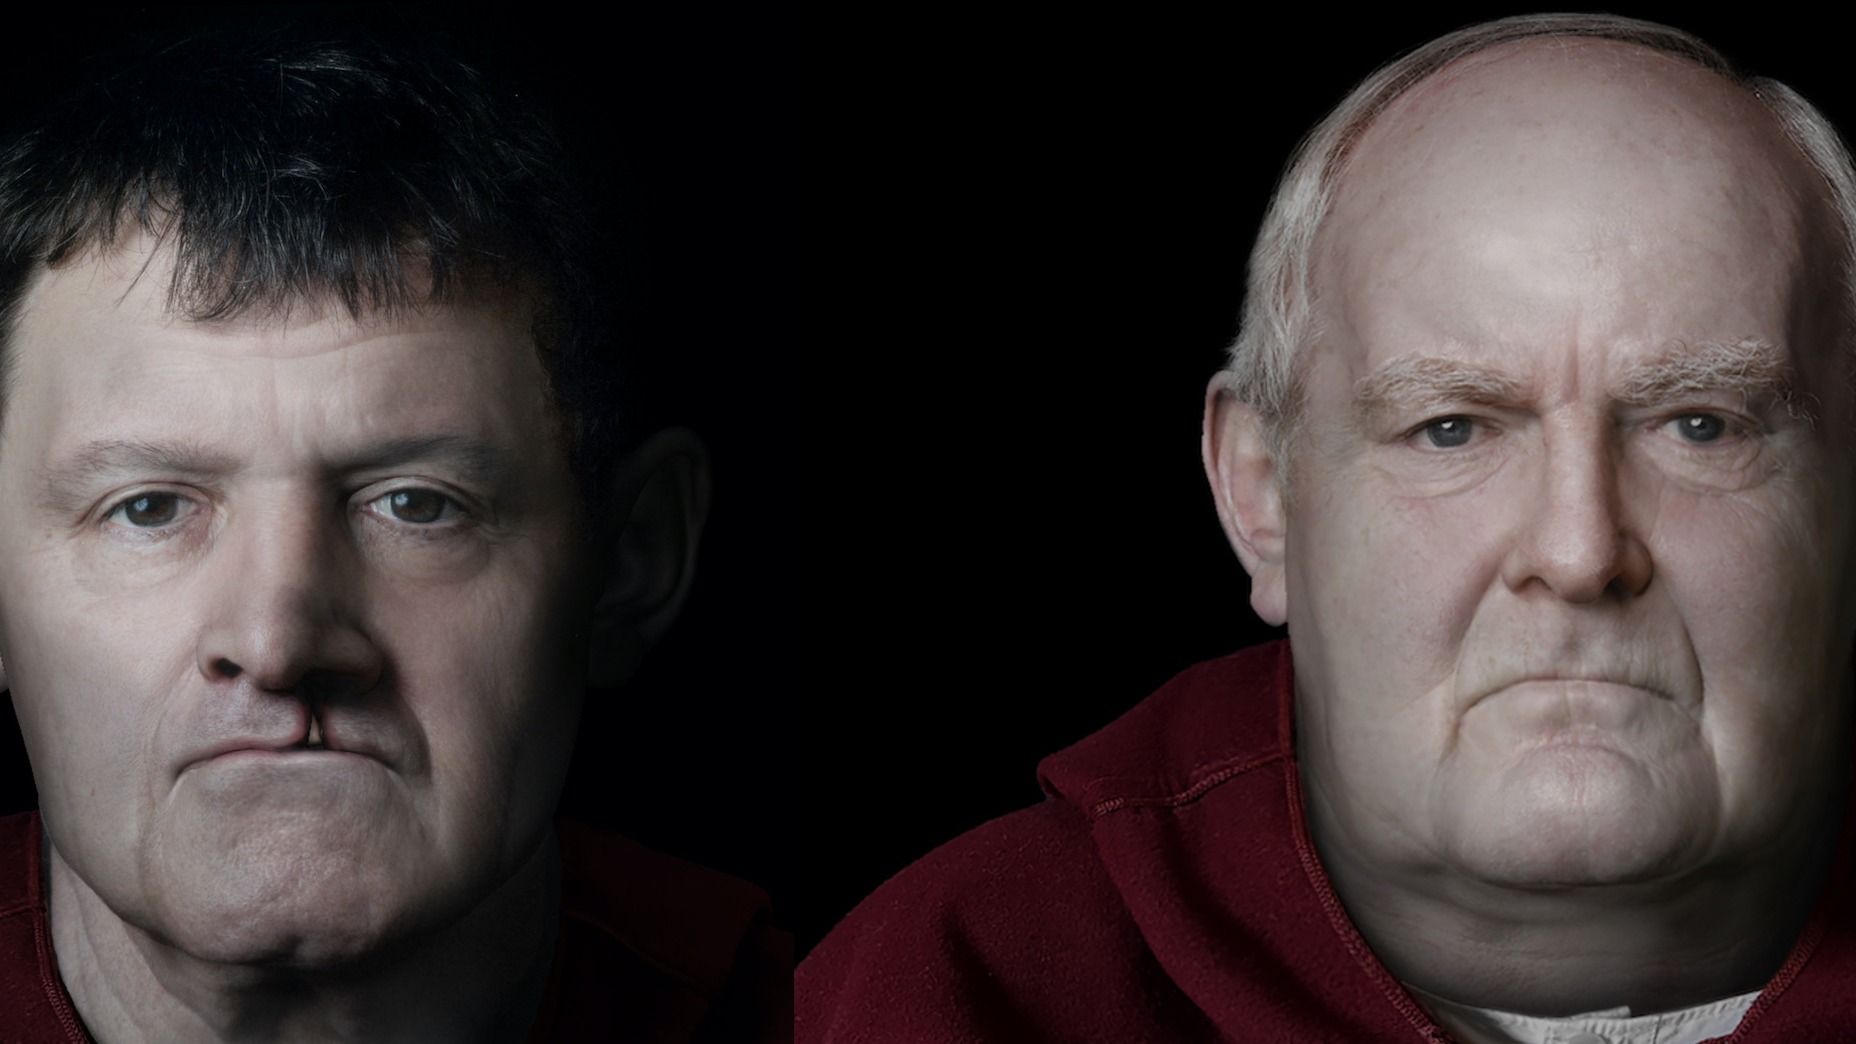 The facial reconstructions of two men.